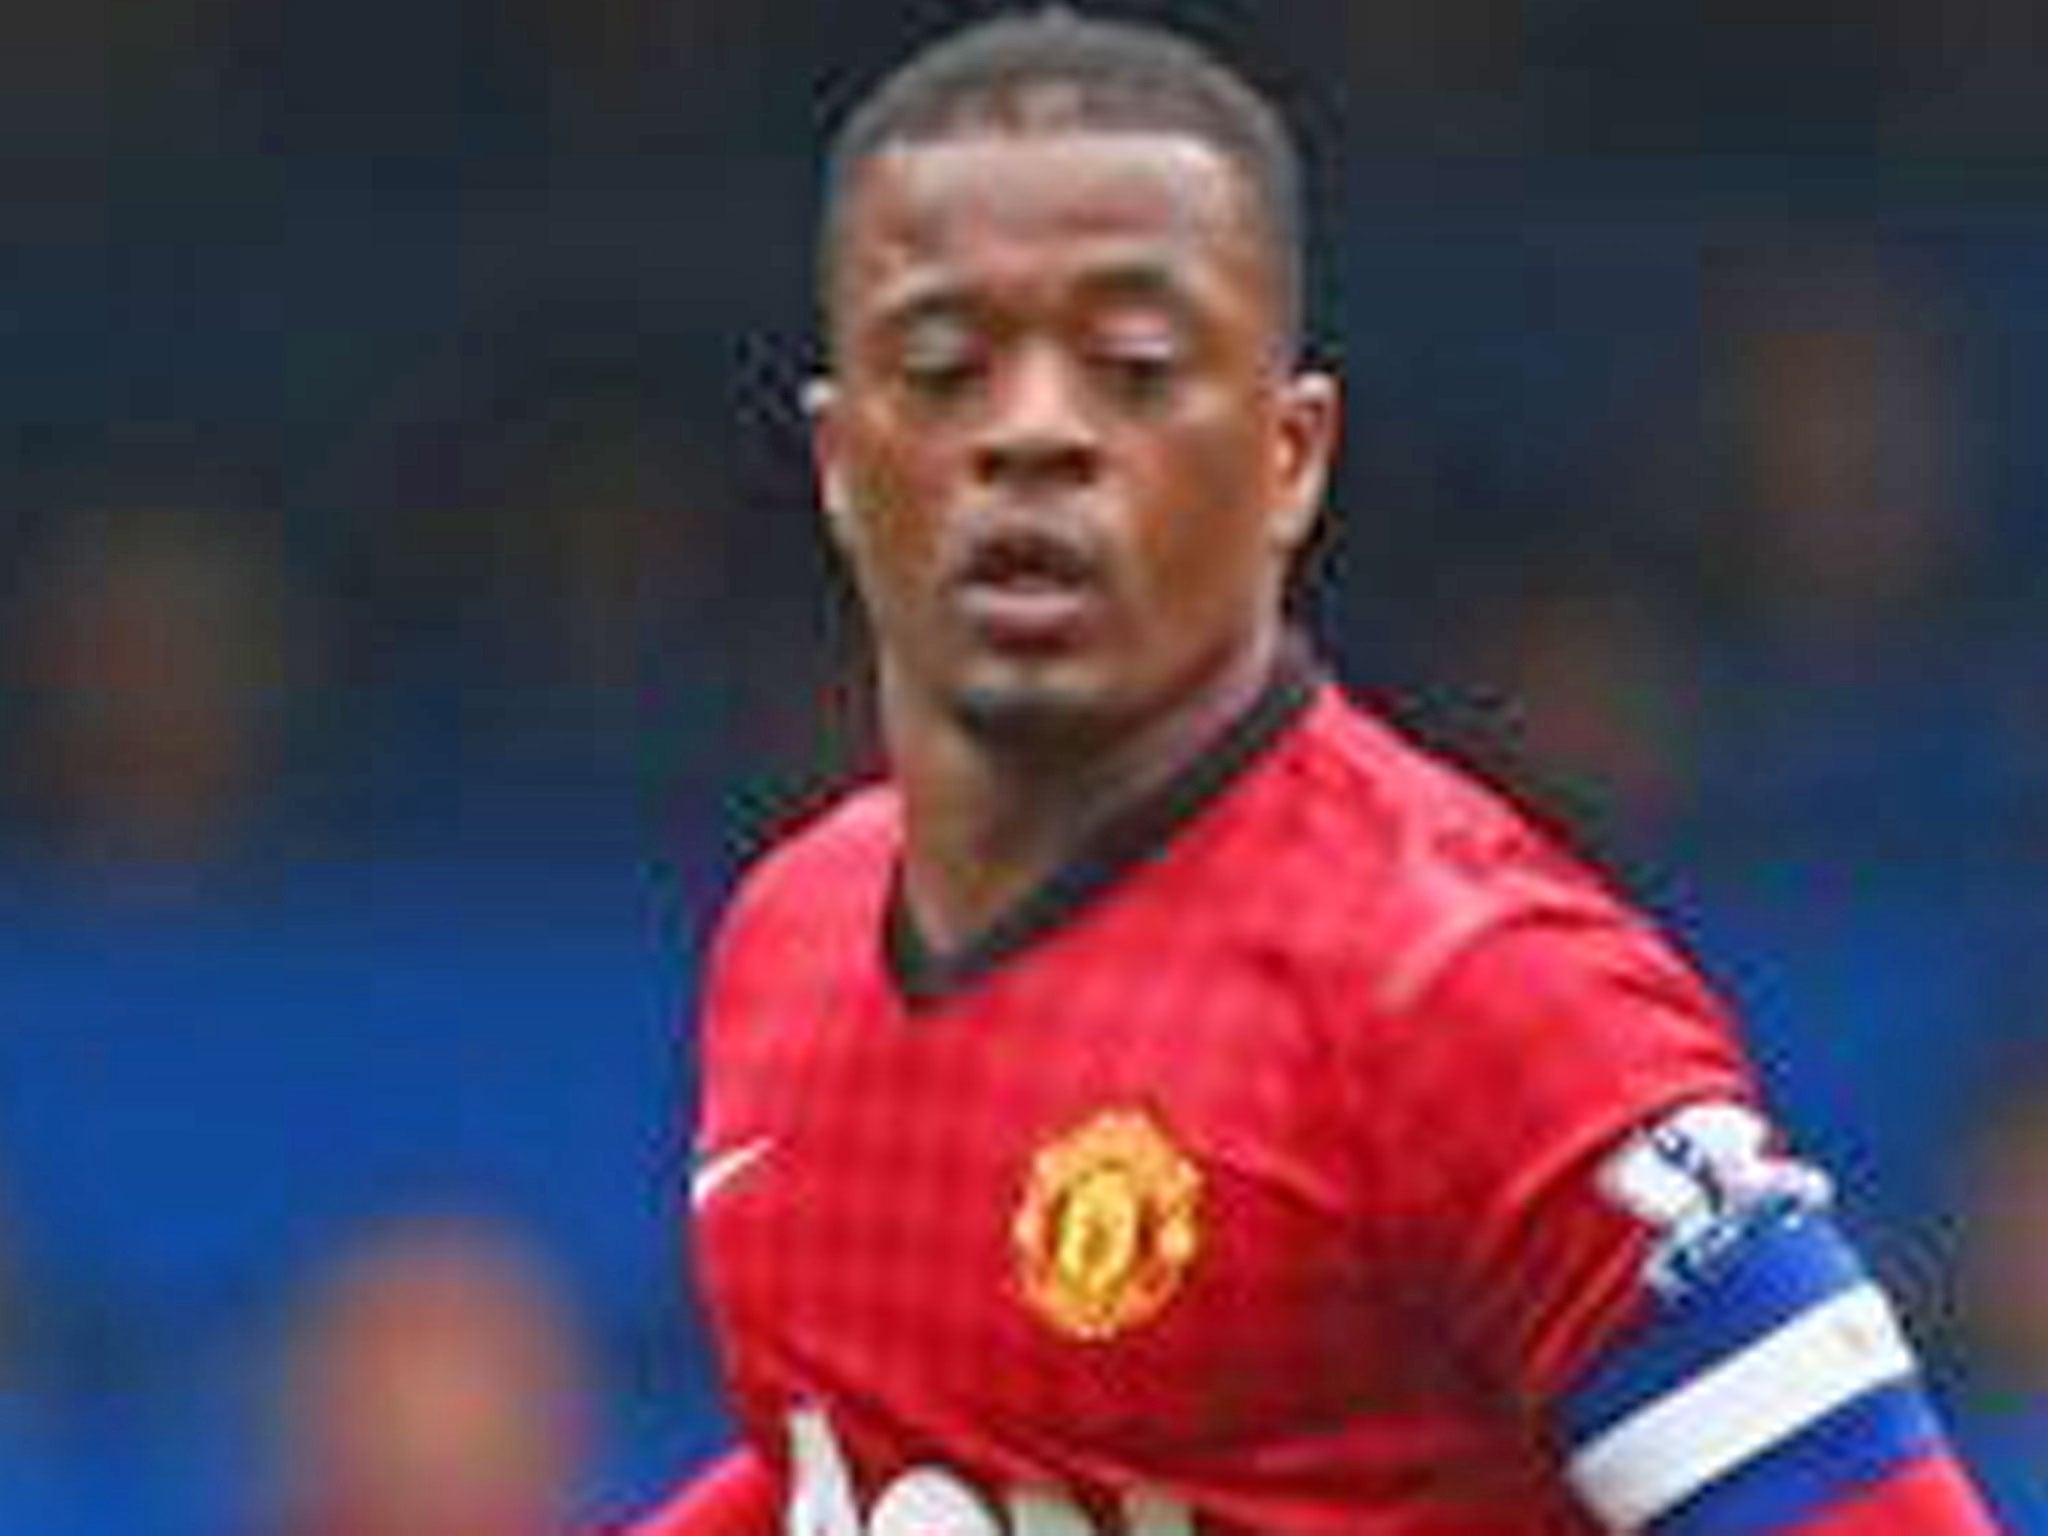 Monaco could be a possible next location for Patrice Evra